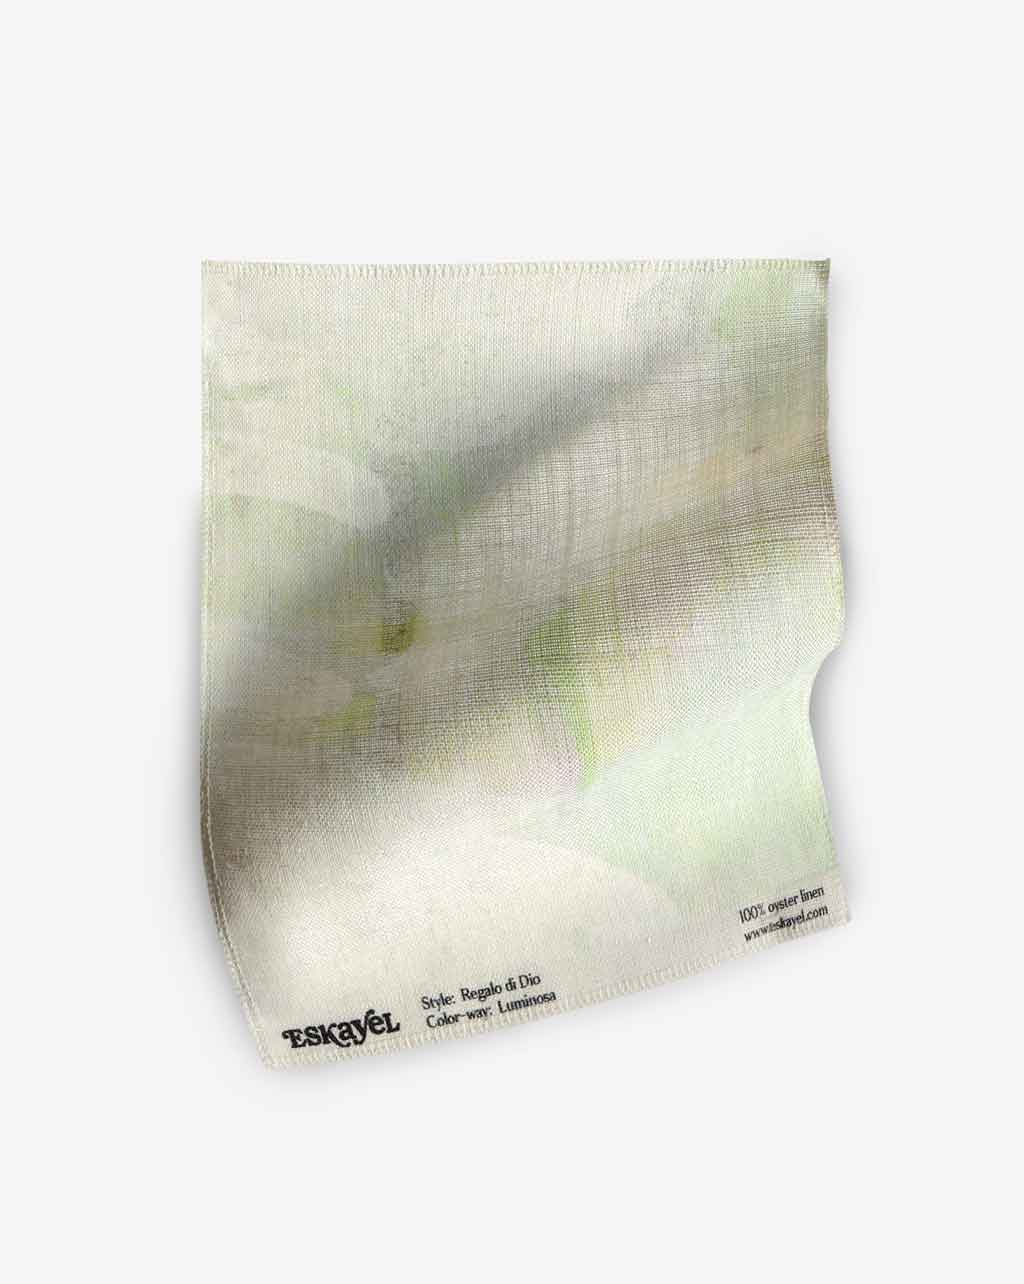 A white Regalo di Dio Fabric Luminosa with pale greens and green and white flowers on it